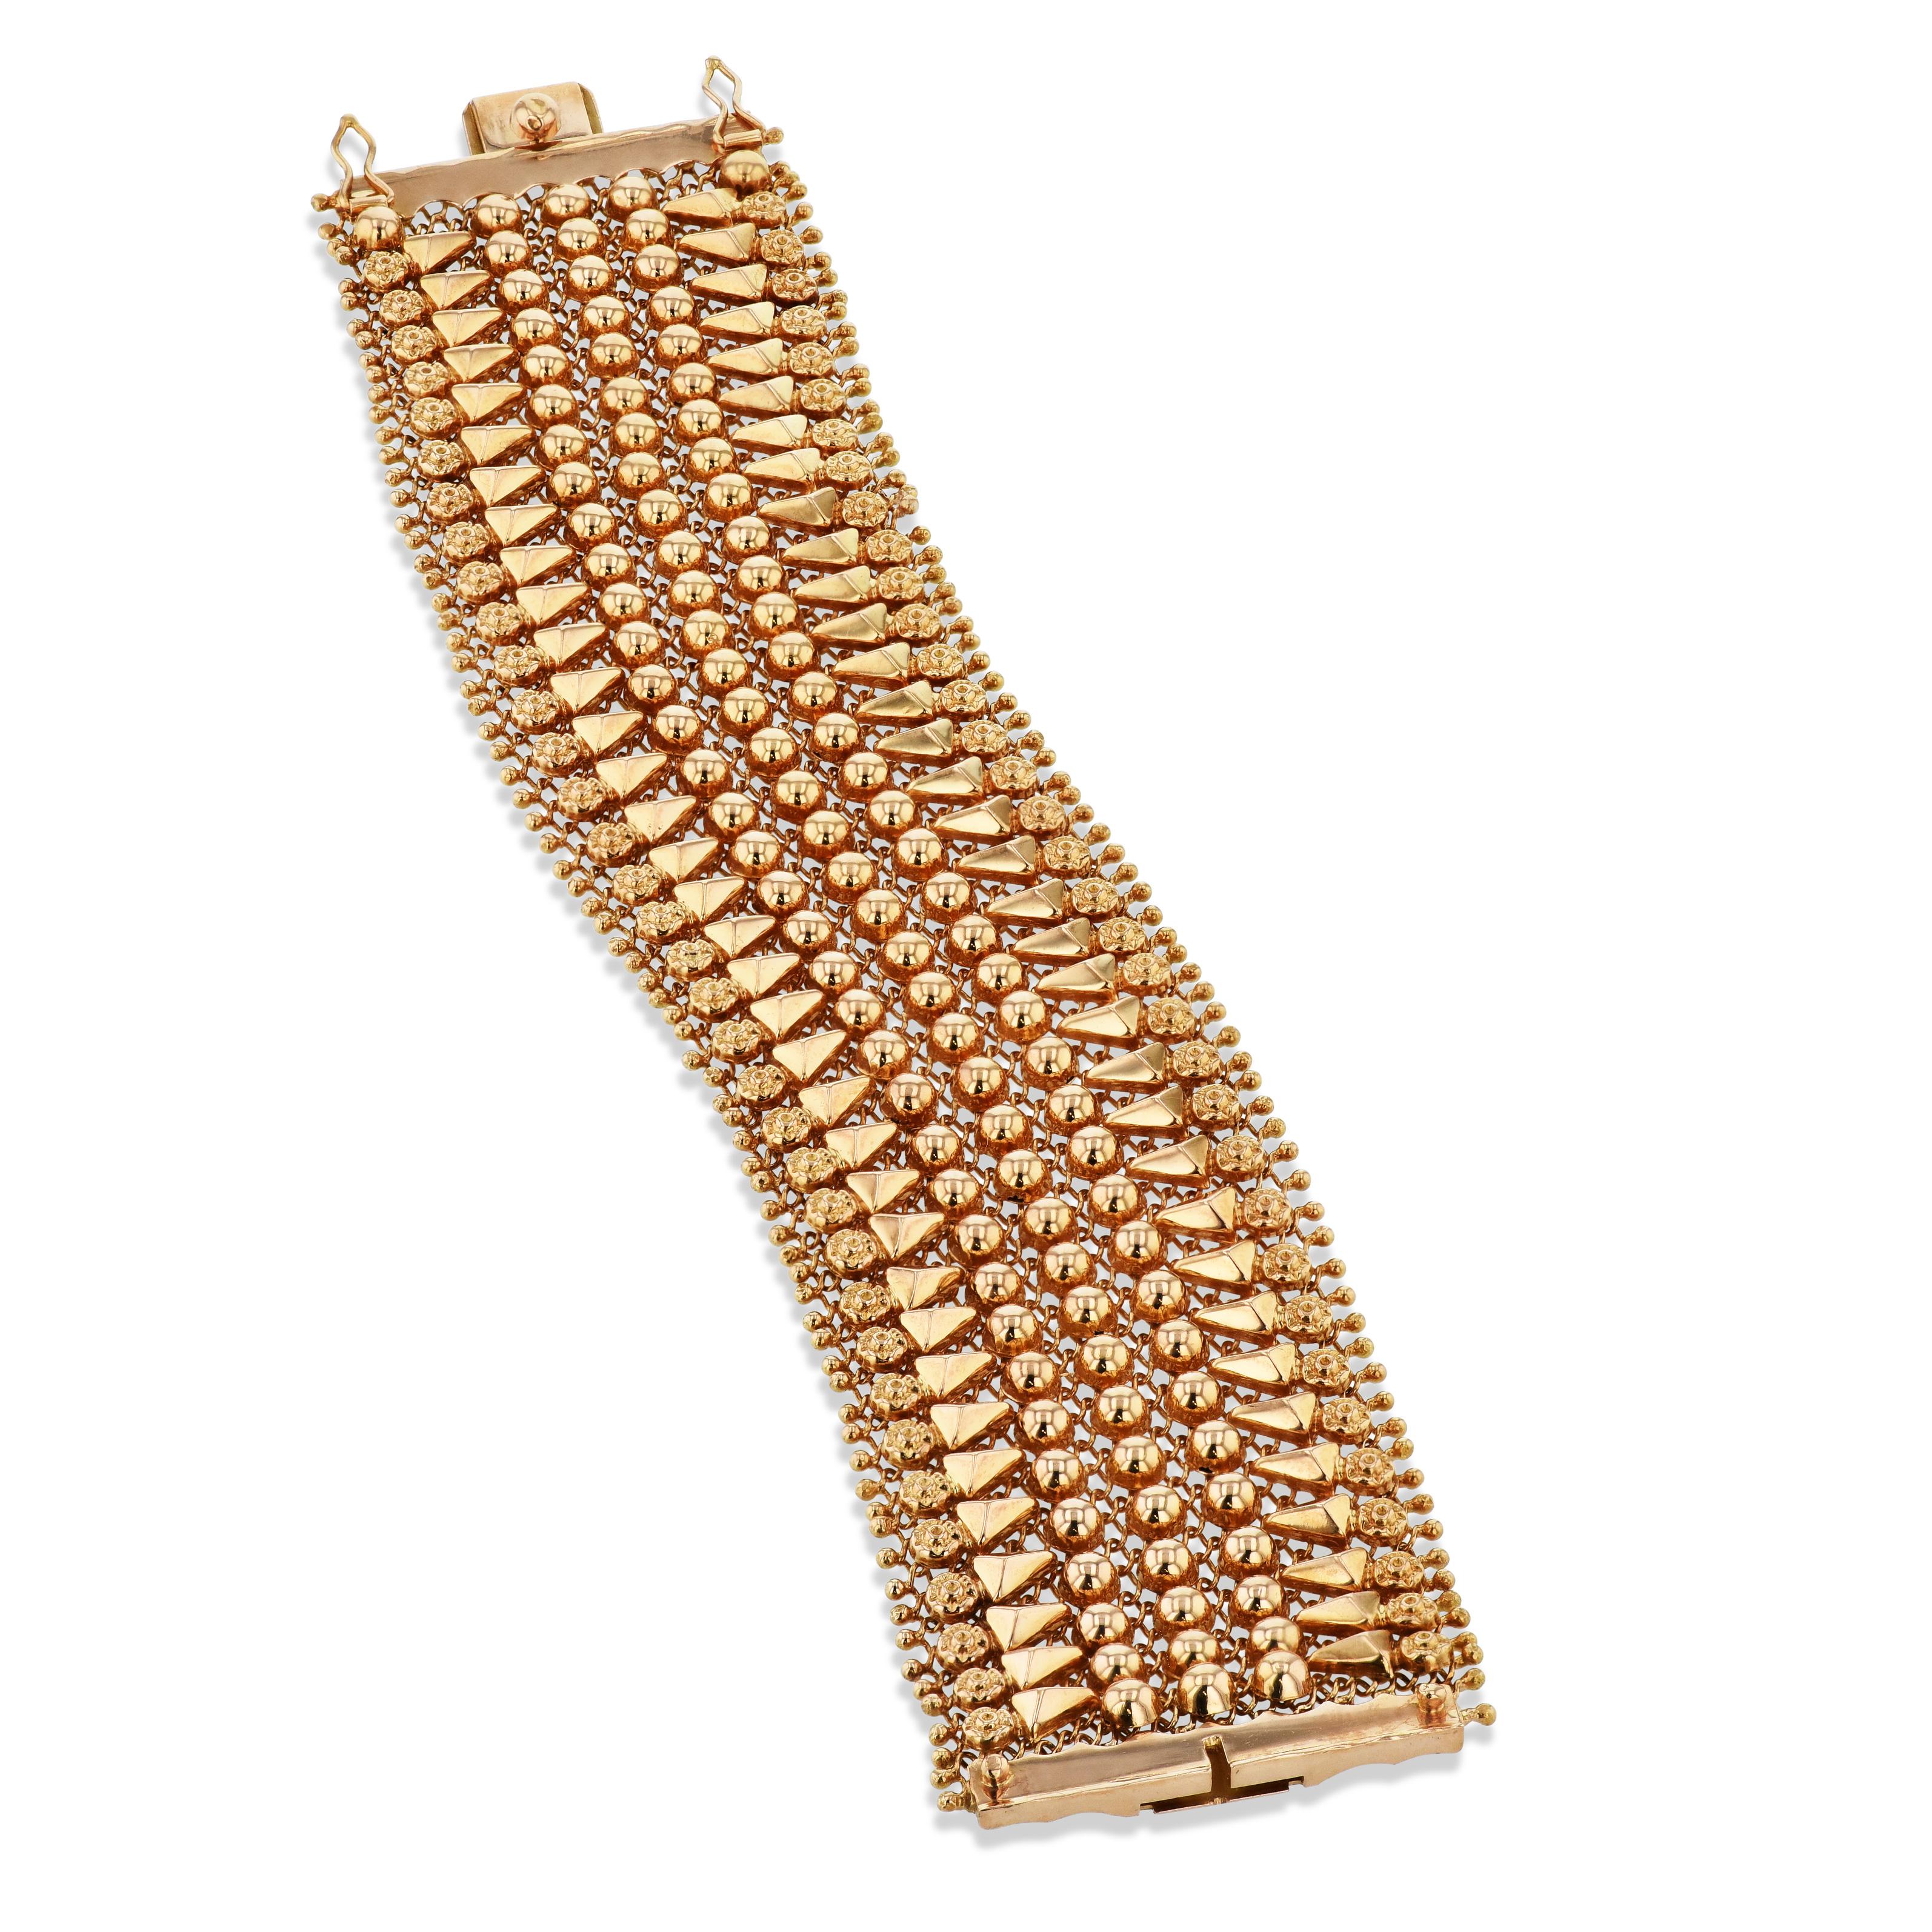 This eye catching 18 karat yellow gold estate bracelet is so beautiful! It is sure to lend a hint of luxury to any attire!

It measures 37.5 mm wide and is 7 inches long. 

-18 karat yellow gold
-Estate bracelet
-7 inches long
-37.5 mm wide
-Estate